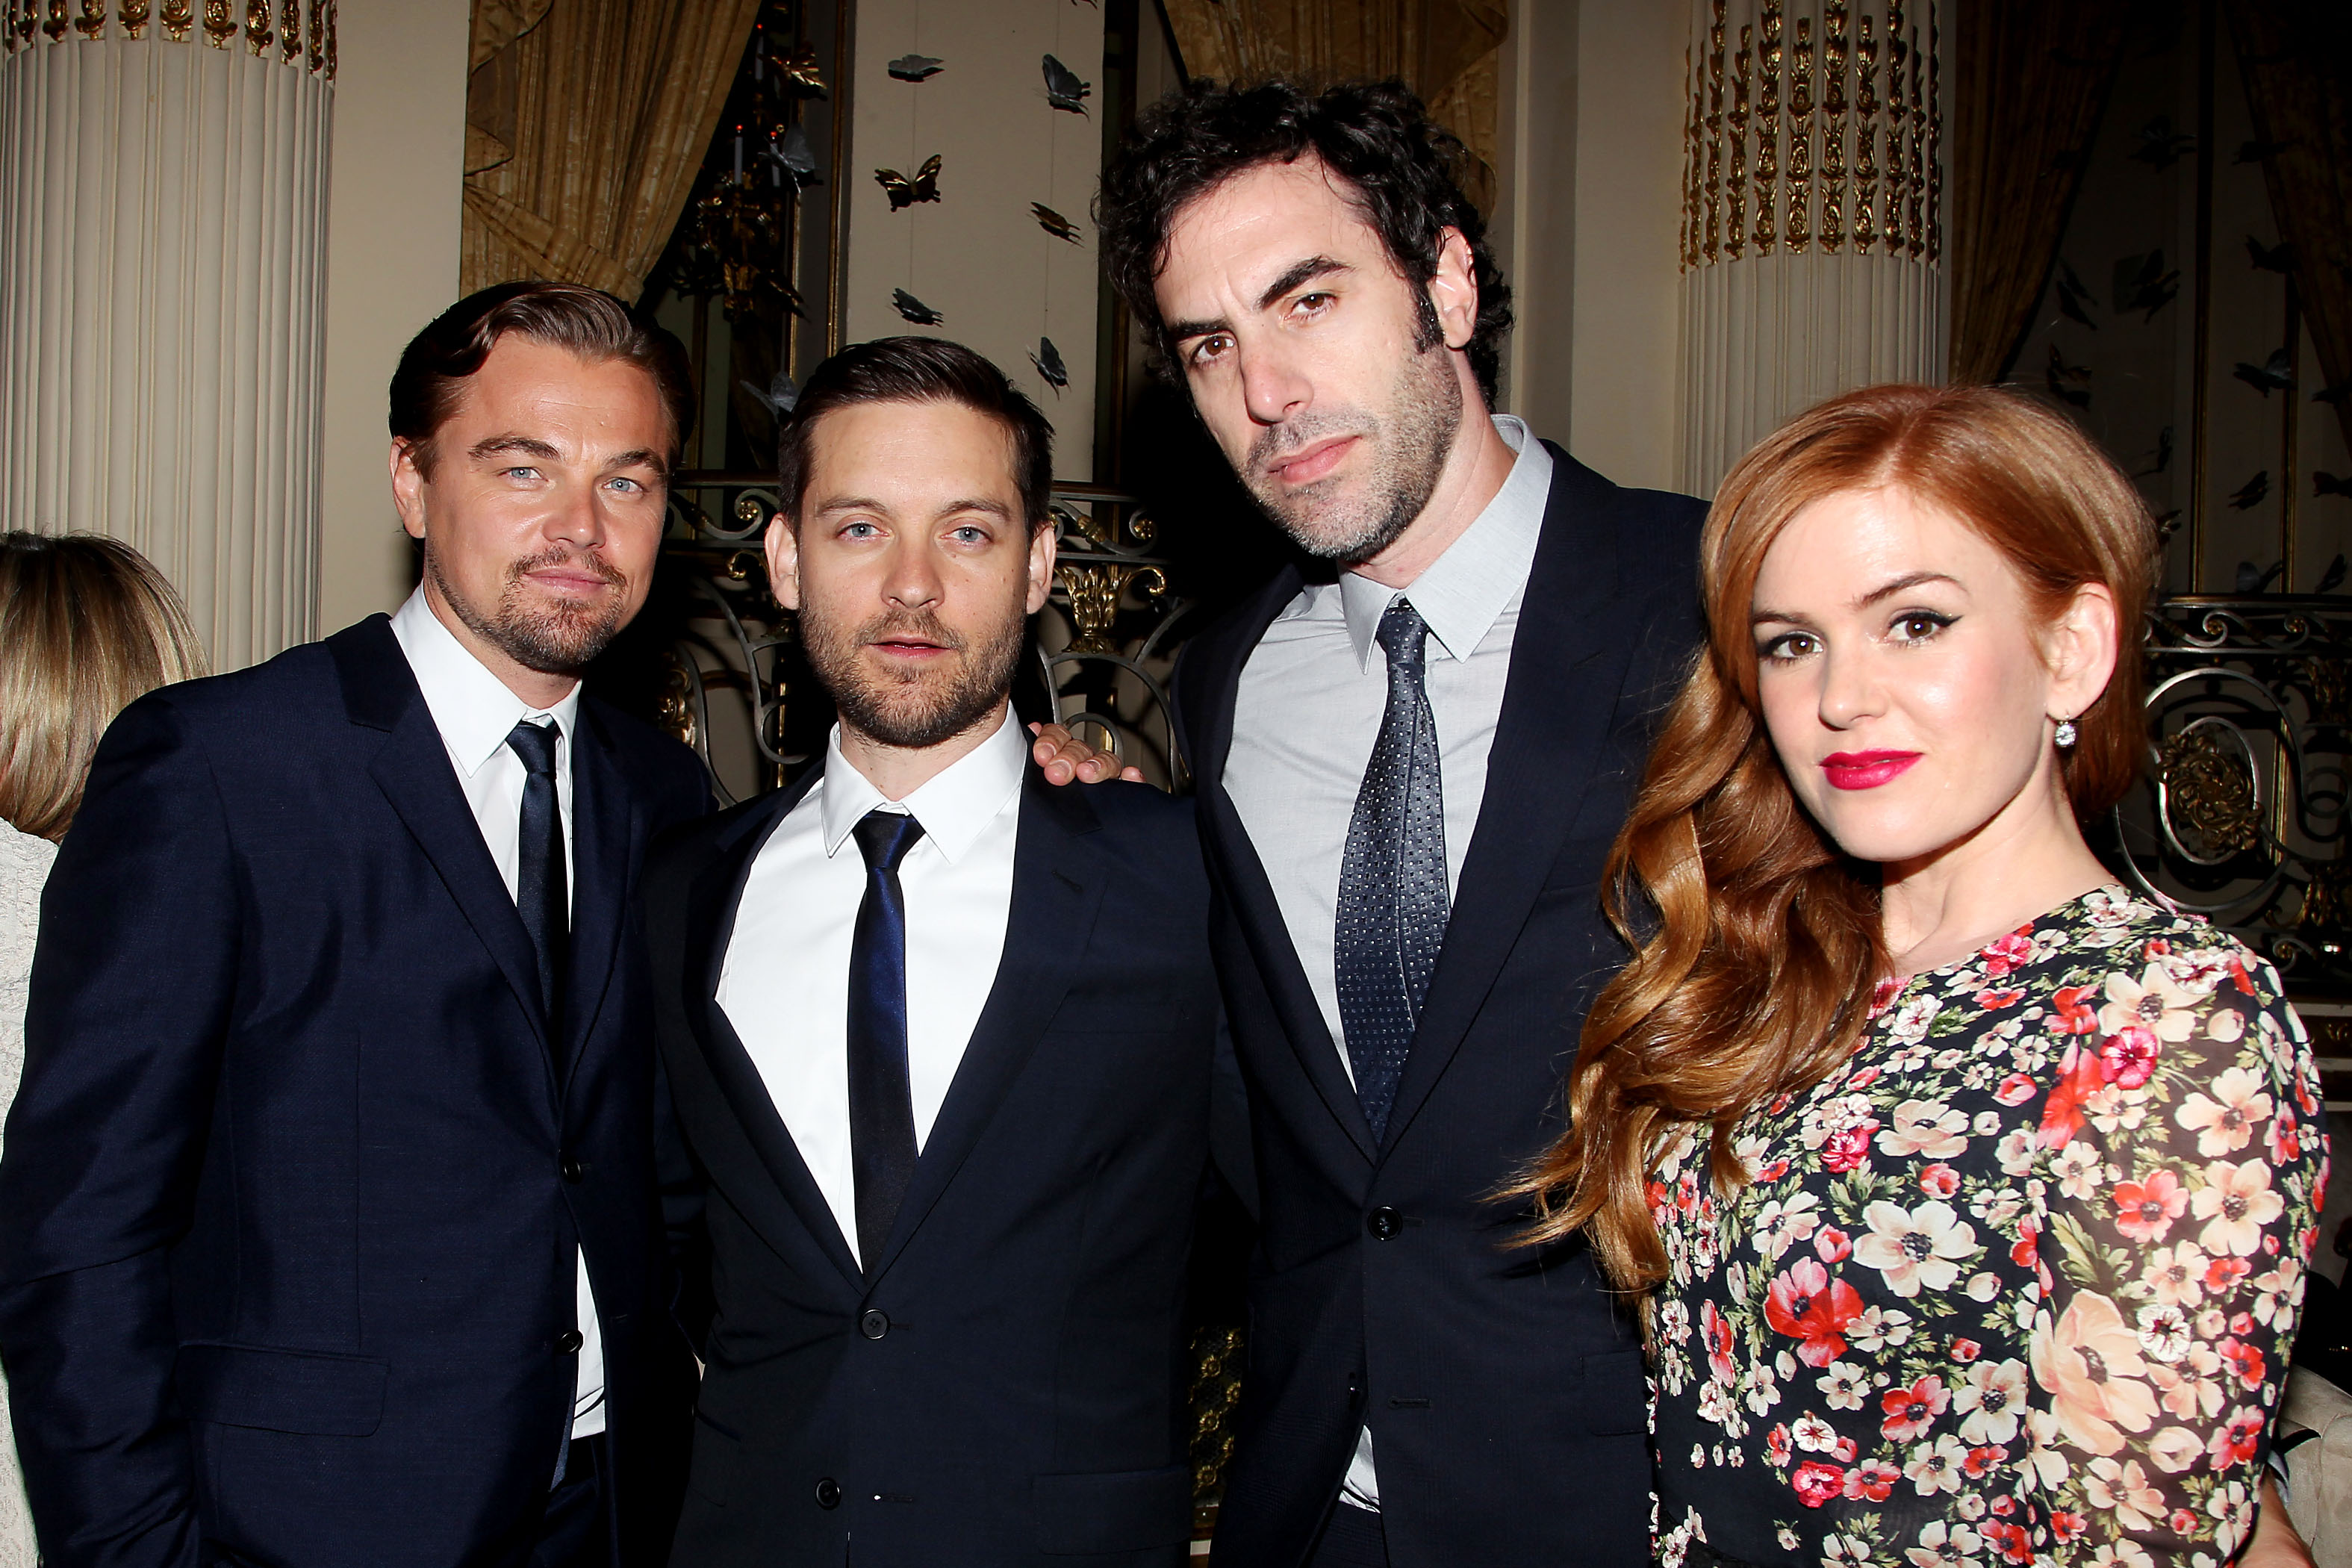 -New York, NY - 05/01/2013 - Moet & Chandon Celebrates "The Great Gatsby" Afterparty -PICTURED: Leonardo DiCaprio,Tobey Maguire, Sacha Baron Cohen, Isla Fisher  -PHOTO by: Dave Allocca/Startraksphoto.com -Filename: B97G0304.JPG -Location: The Plaza Hotel Editorial - Rights Managed Image - Please contact www.startraksphoto.com for licensing fee Startraks Photo New York, NY For licensing please call 212-414-9464 or email sales@startraksphoto.com